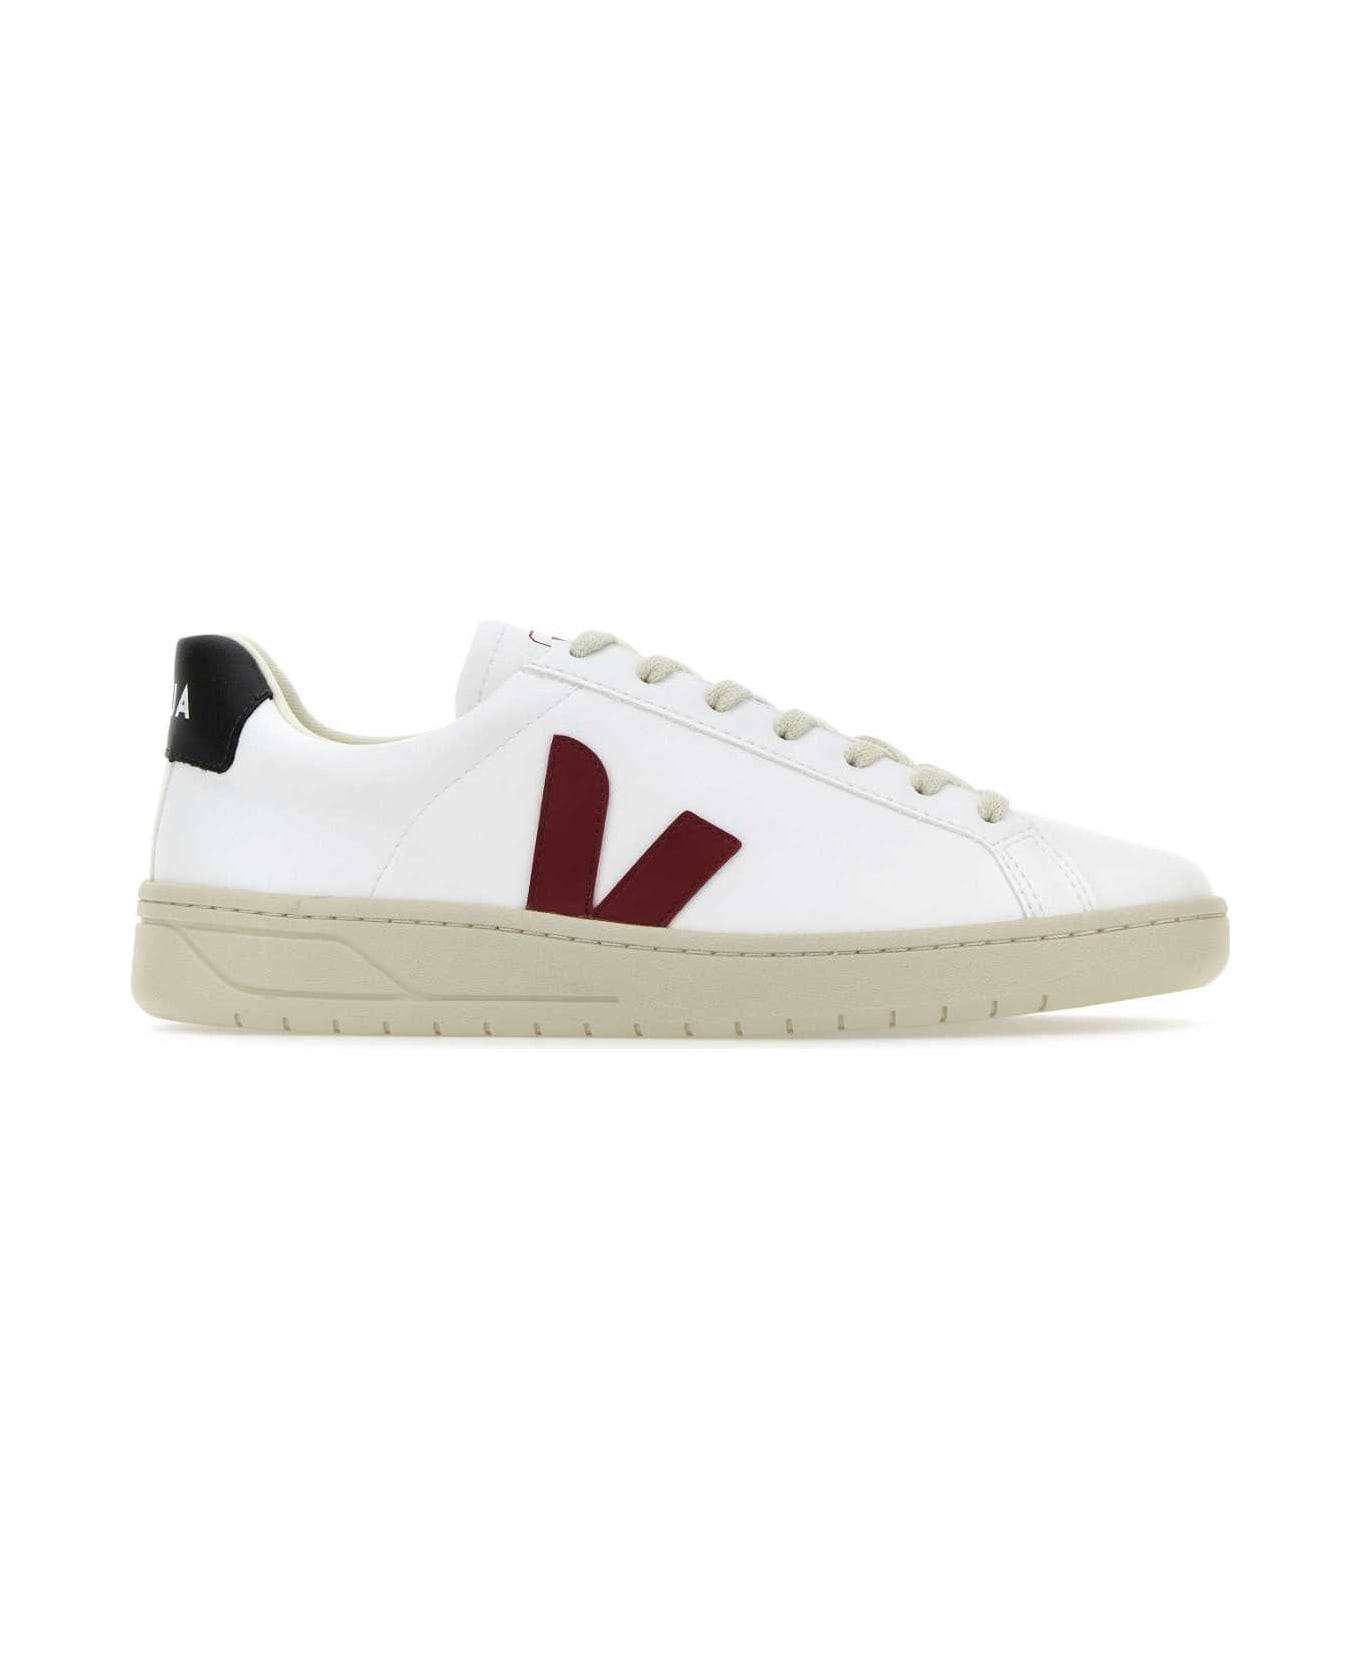 Veja White Synthetic Leather Urca Sneakers - WHITEMARSALABLACK